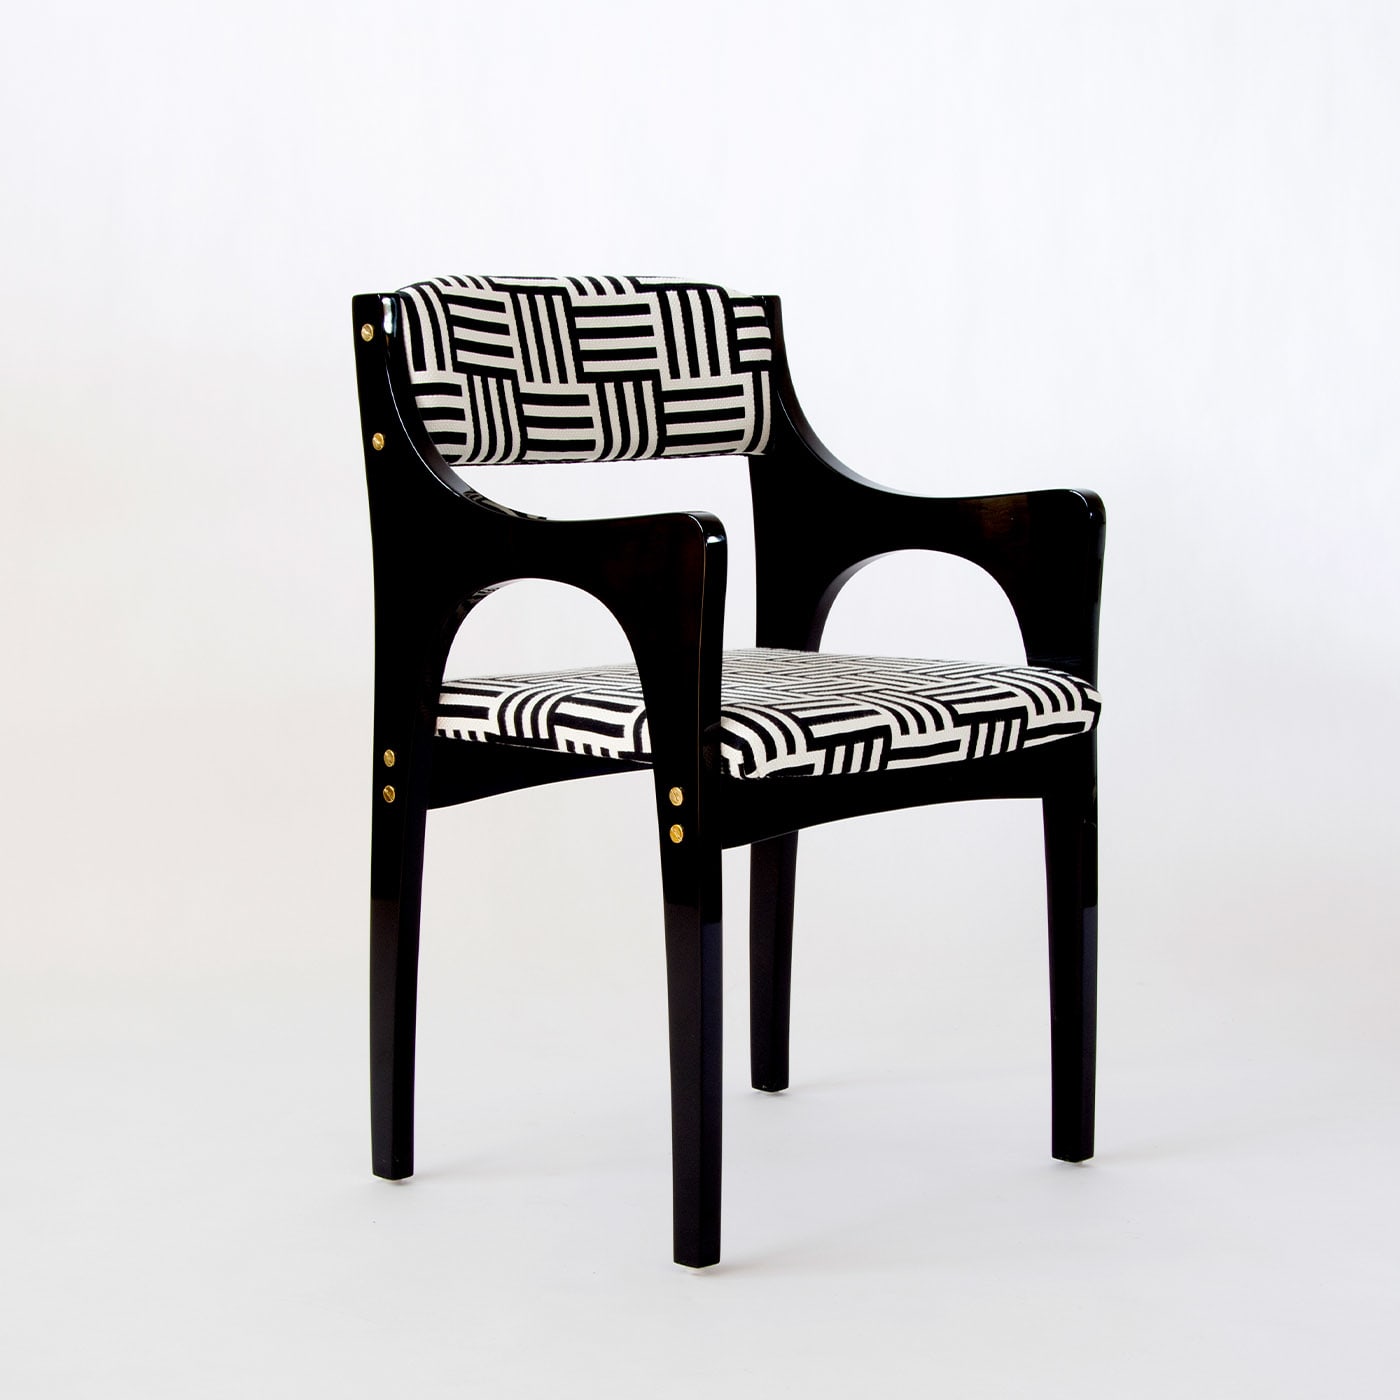 Lola 50's-Inspired Black & White Chair With Arms - Extroverso